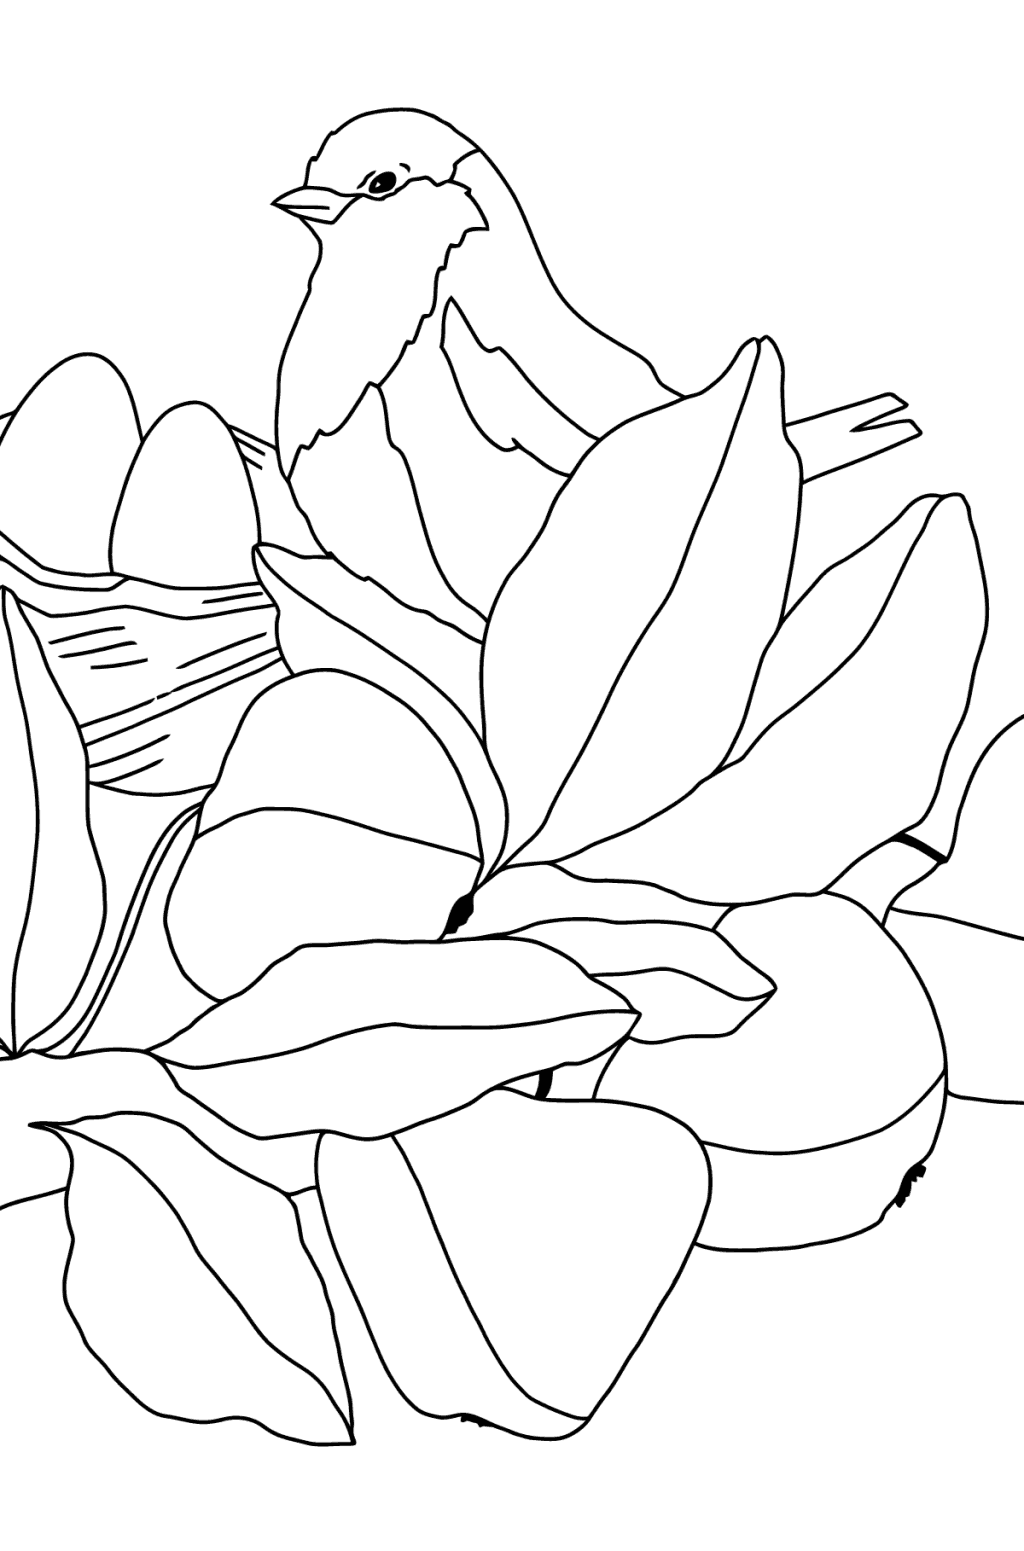 printable nature coloring pages for kids cool2bkids easy coloring